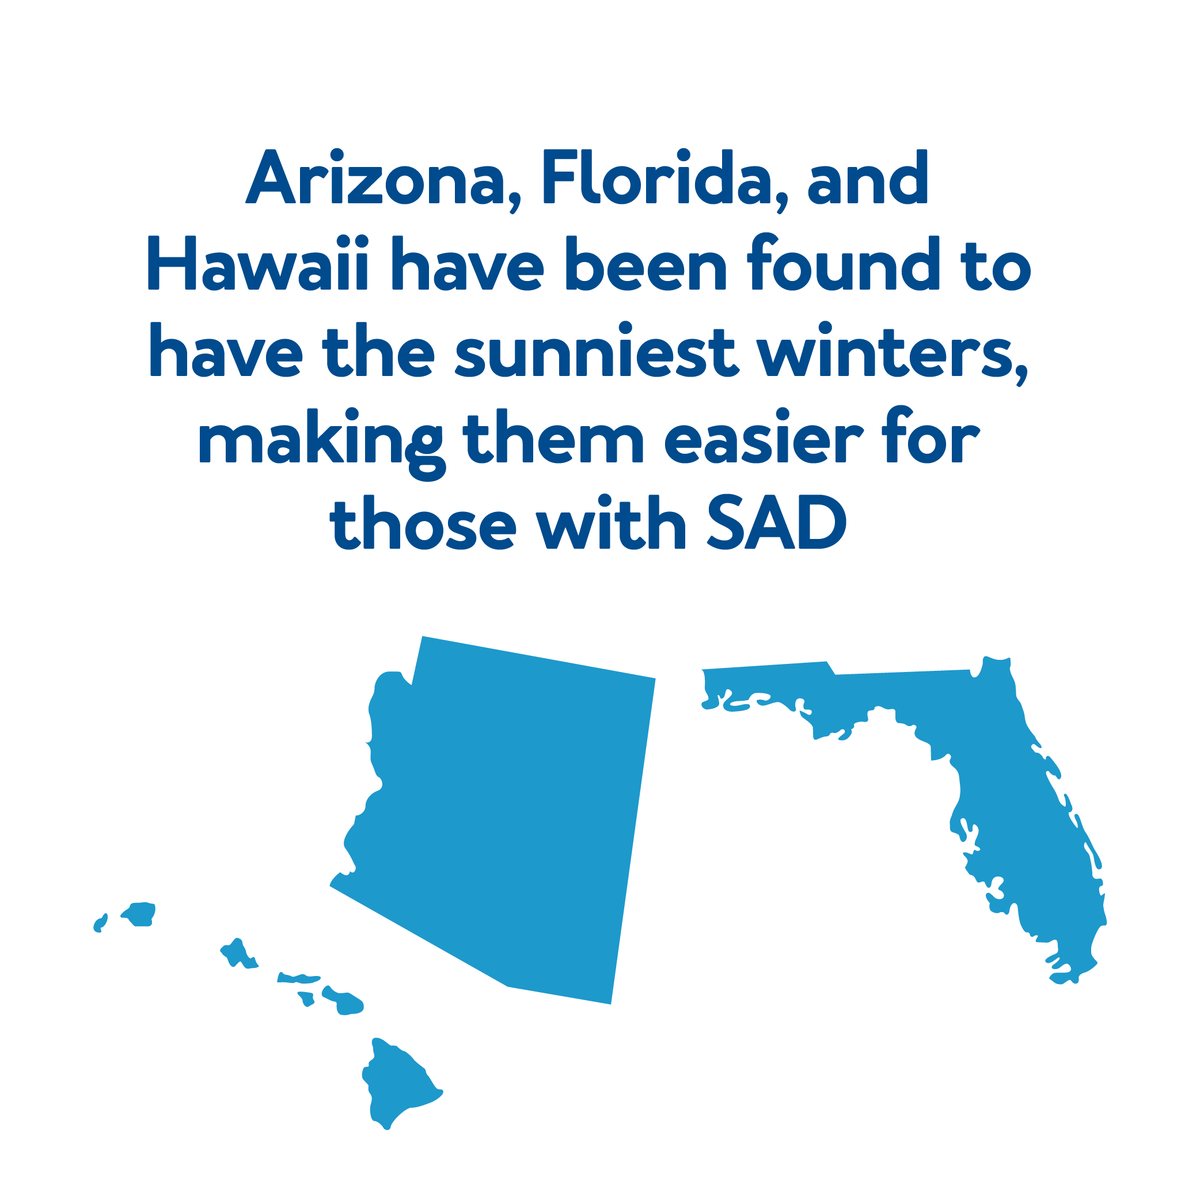 Arizona, Florida, and Hawaii have been found to have the sunniest winters, making them easier for those with SAD.